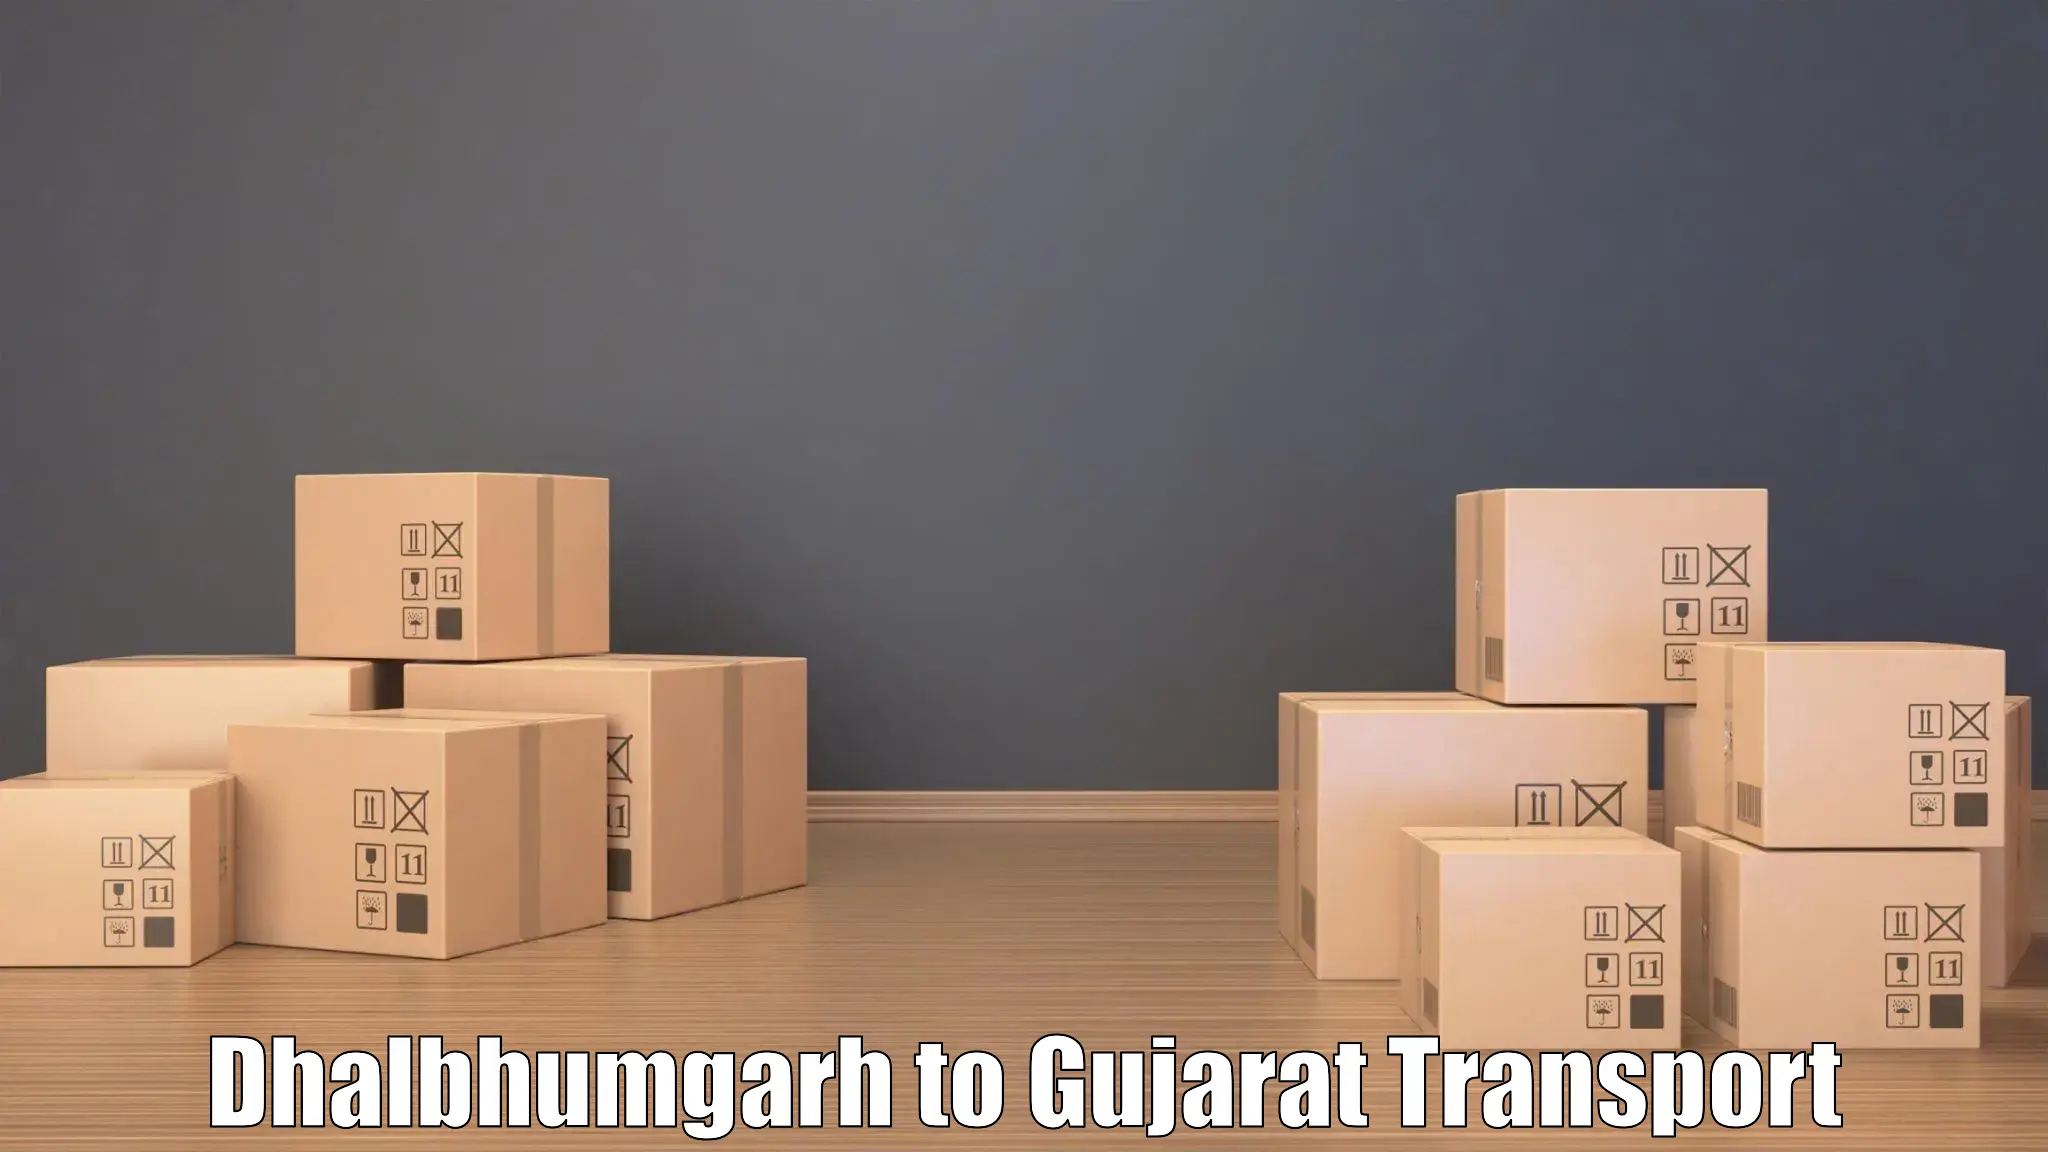 Daily parcel service transport Dhalbhumgarh to Dhanera